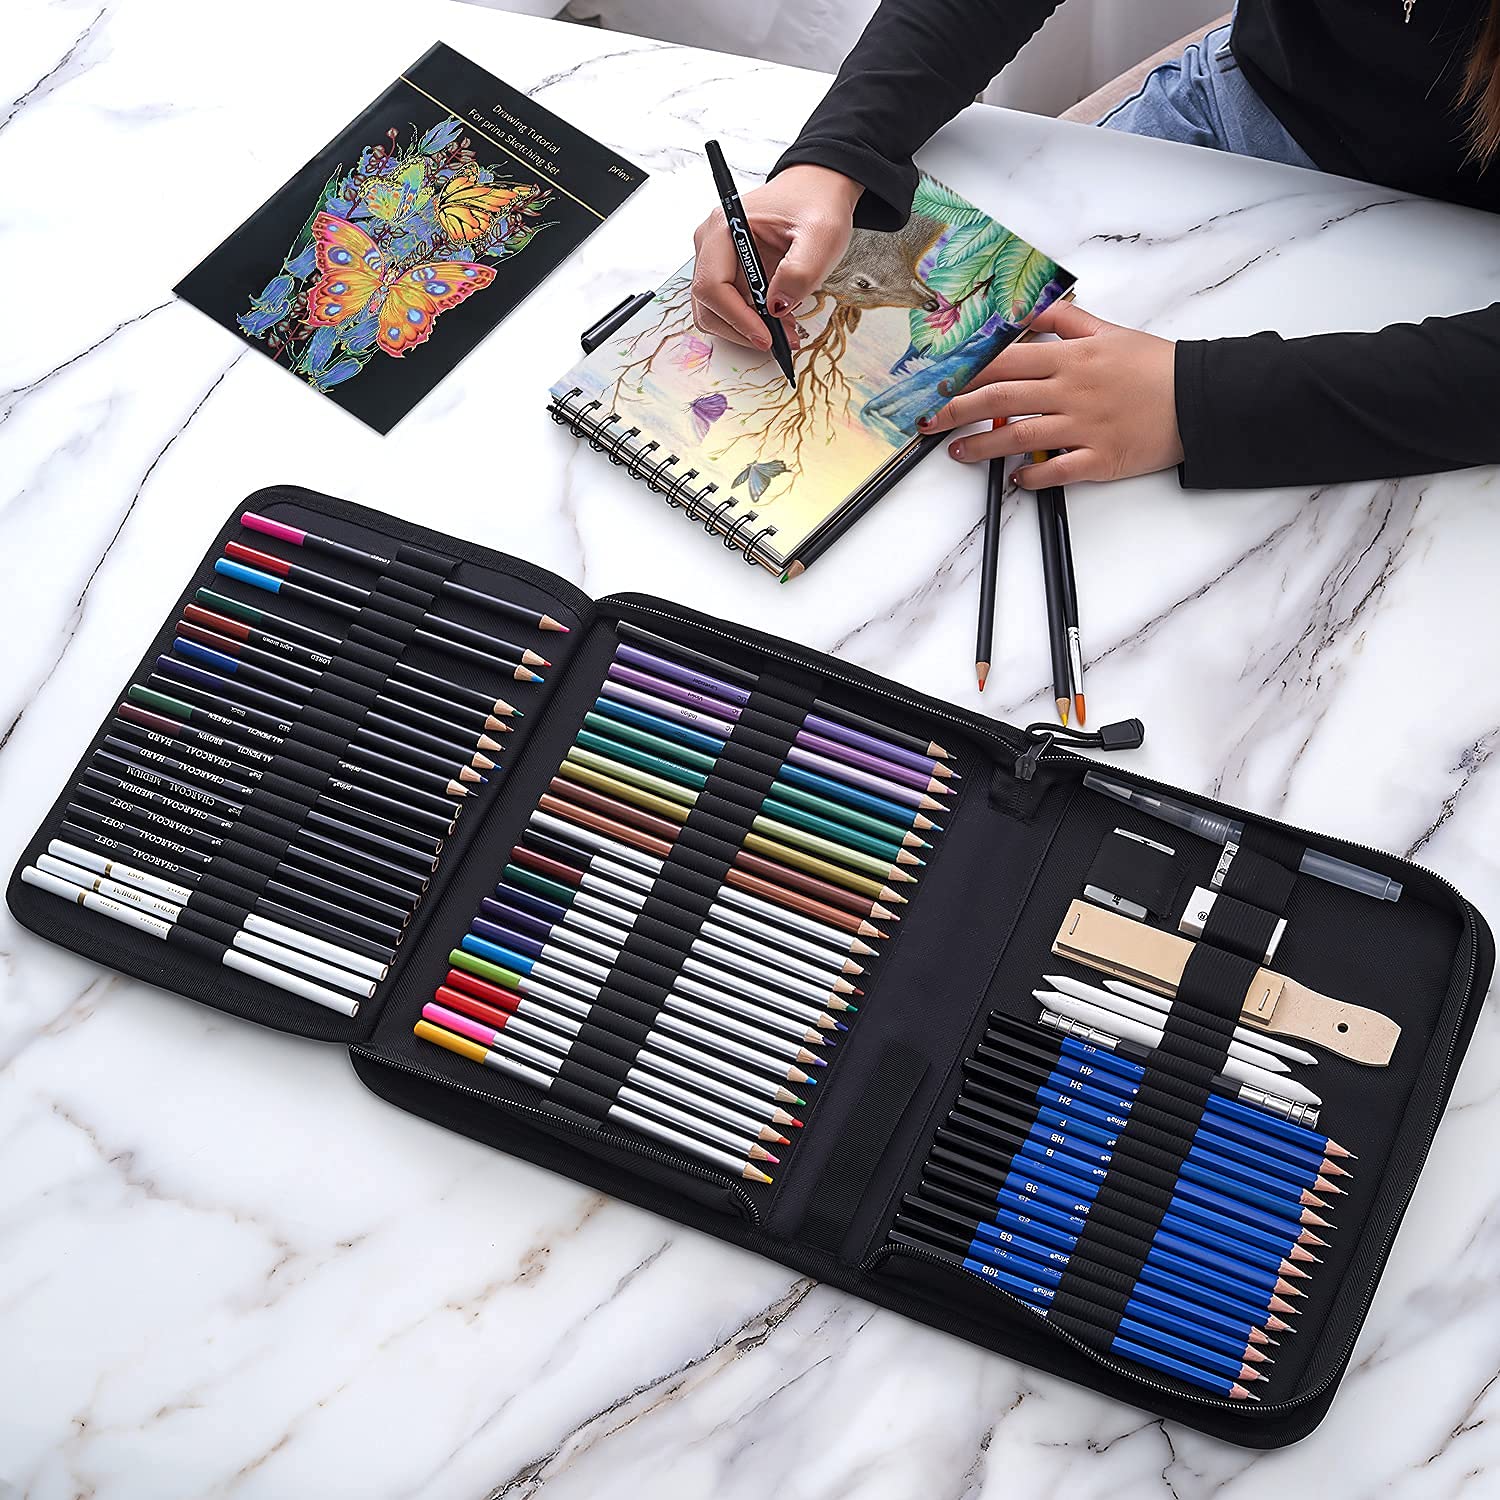 Amazon.com : Castle Art Supplies 100 Piece Drawing & Sketching Set |  Graphite, Charcoal, Pastel, Metallic & Water Soluble Pencils + Sticks,  Fineliners | For Professionals, Adult Artists | In Tough Travel